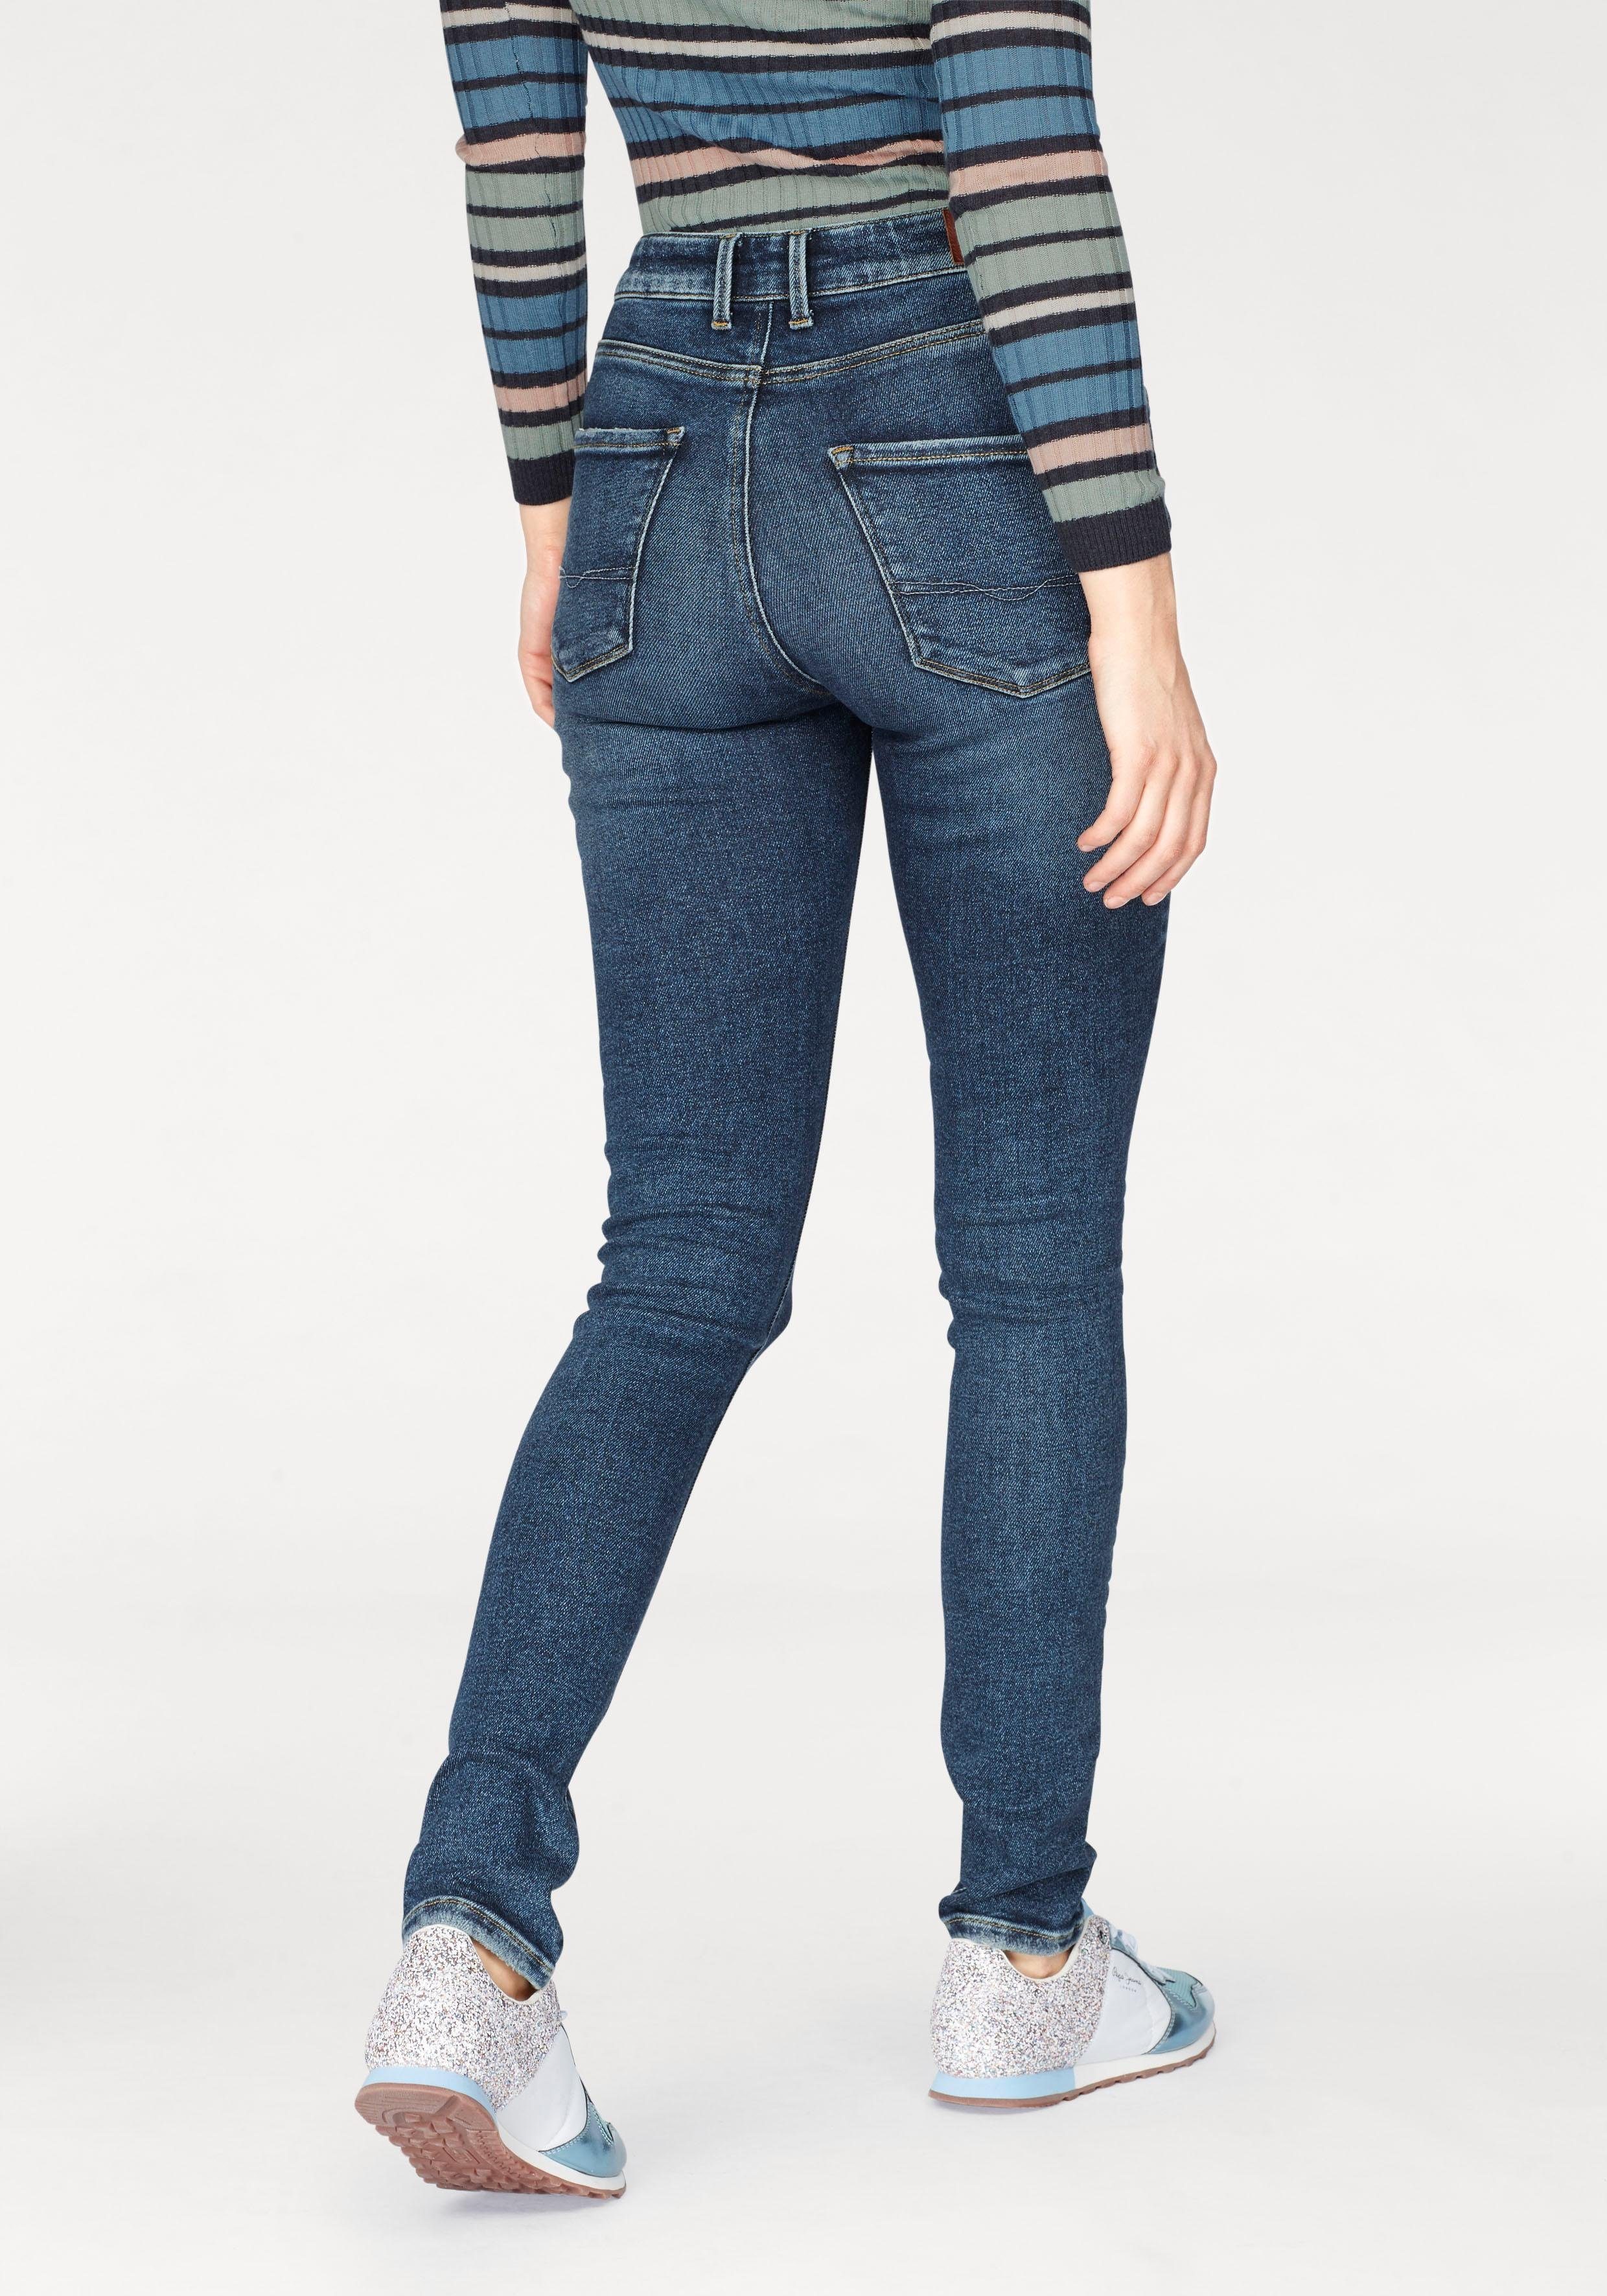 Otto - Pepe Jeans NU 15% KORTING: Pepe Jeans skinny-fitjeans REGENT OPEN END